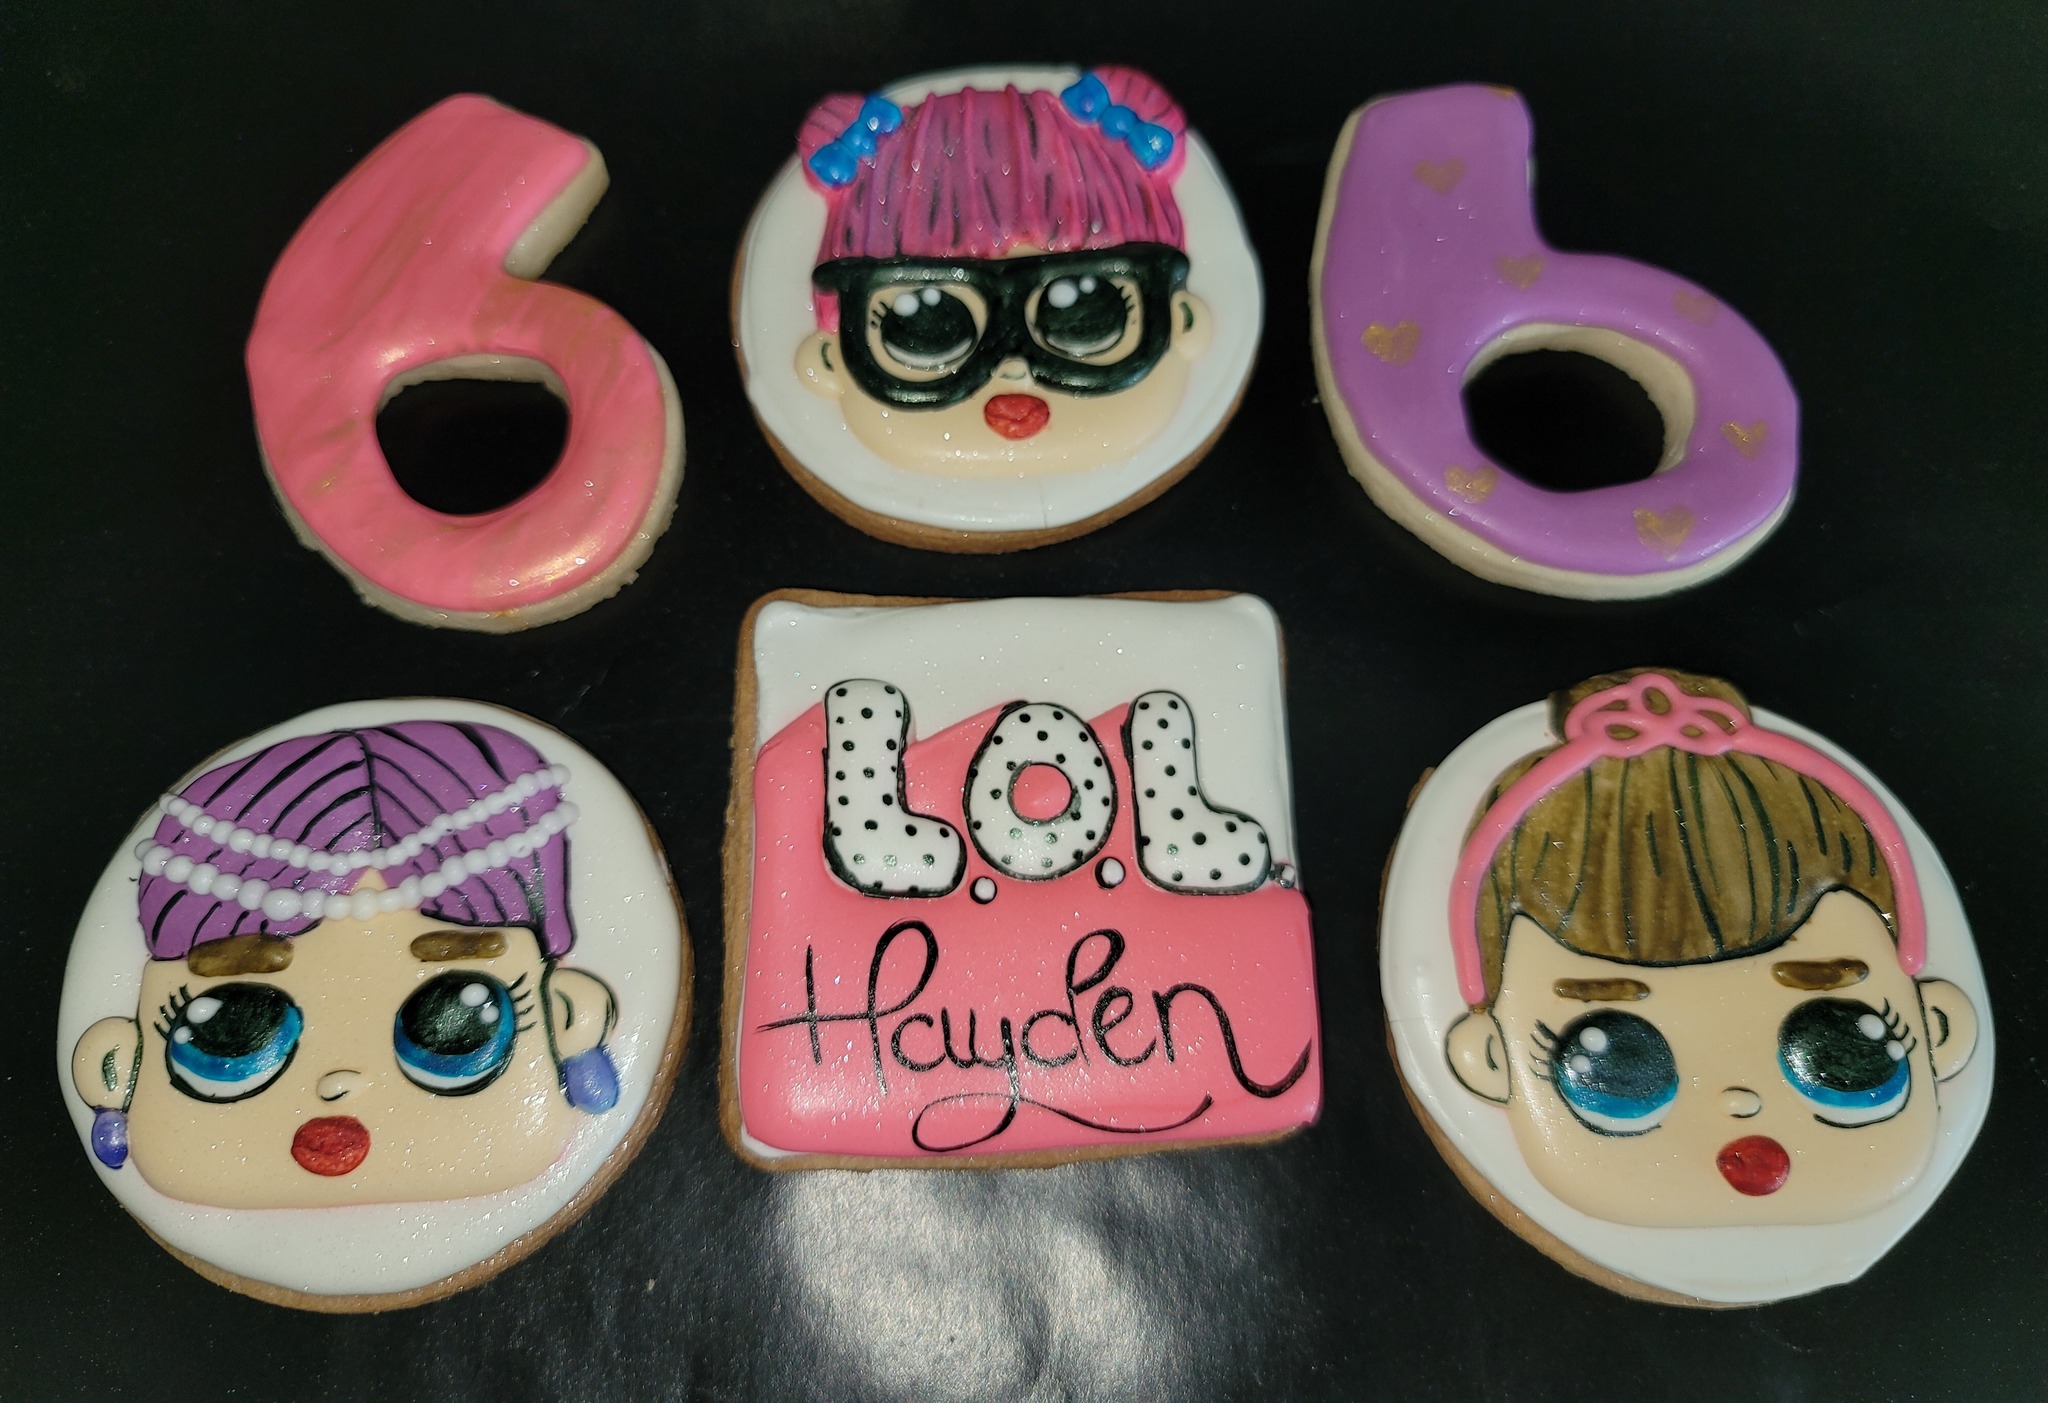 A group of cookies decorated with lol doll faces.